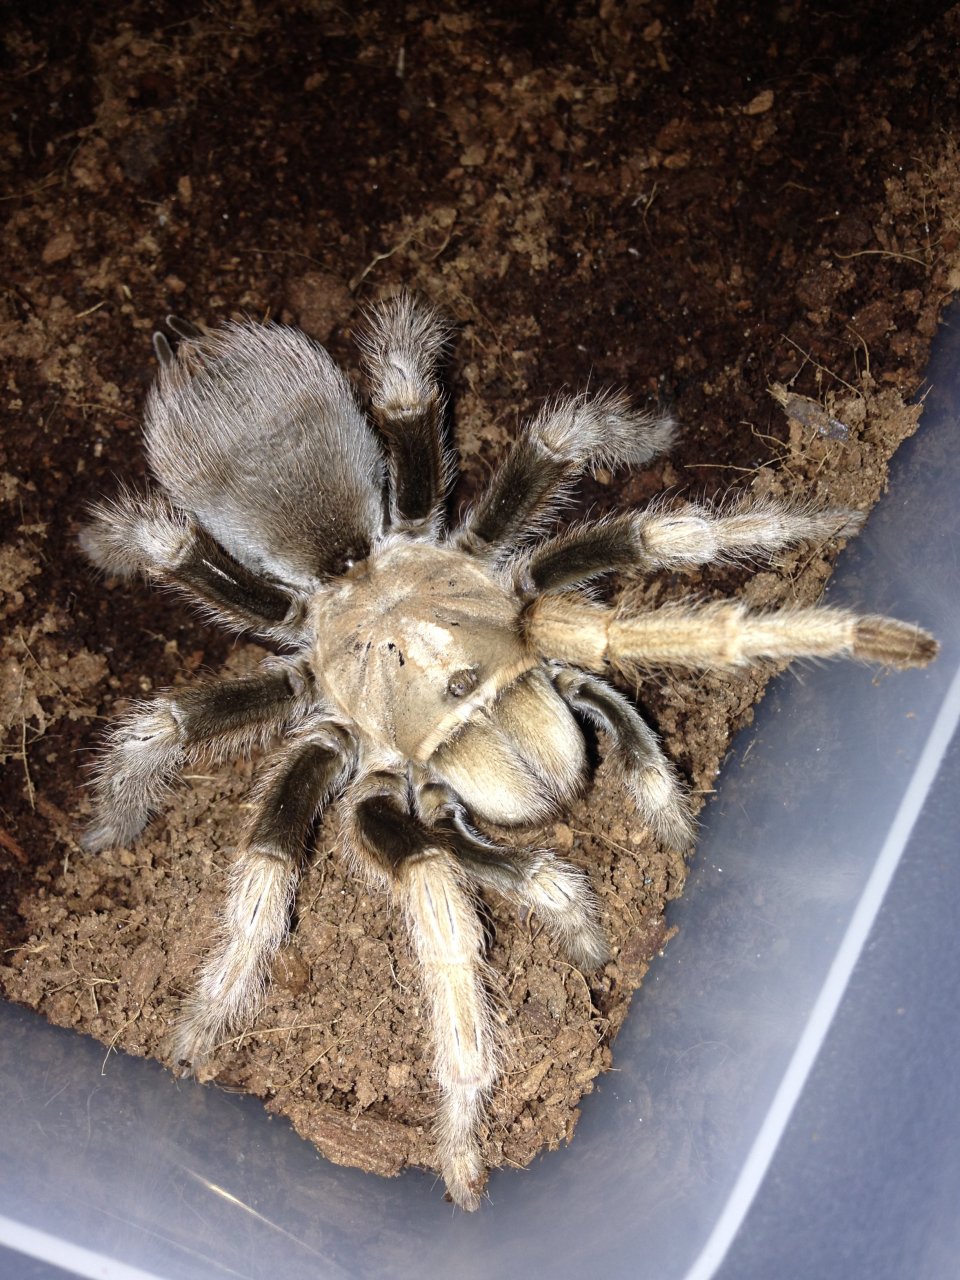 My new A. chalcodes